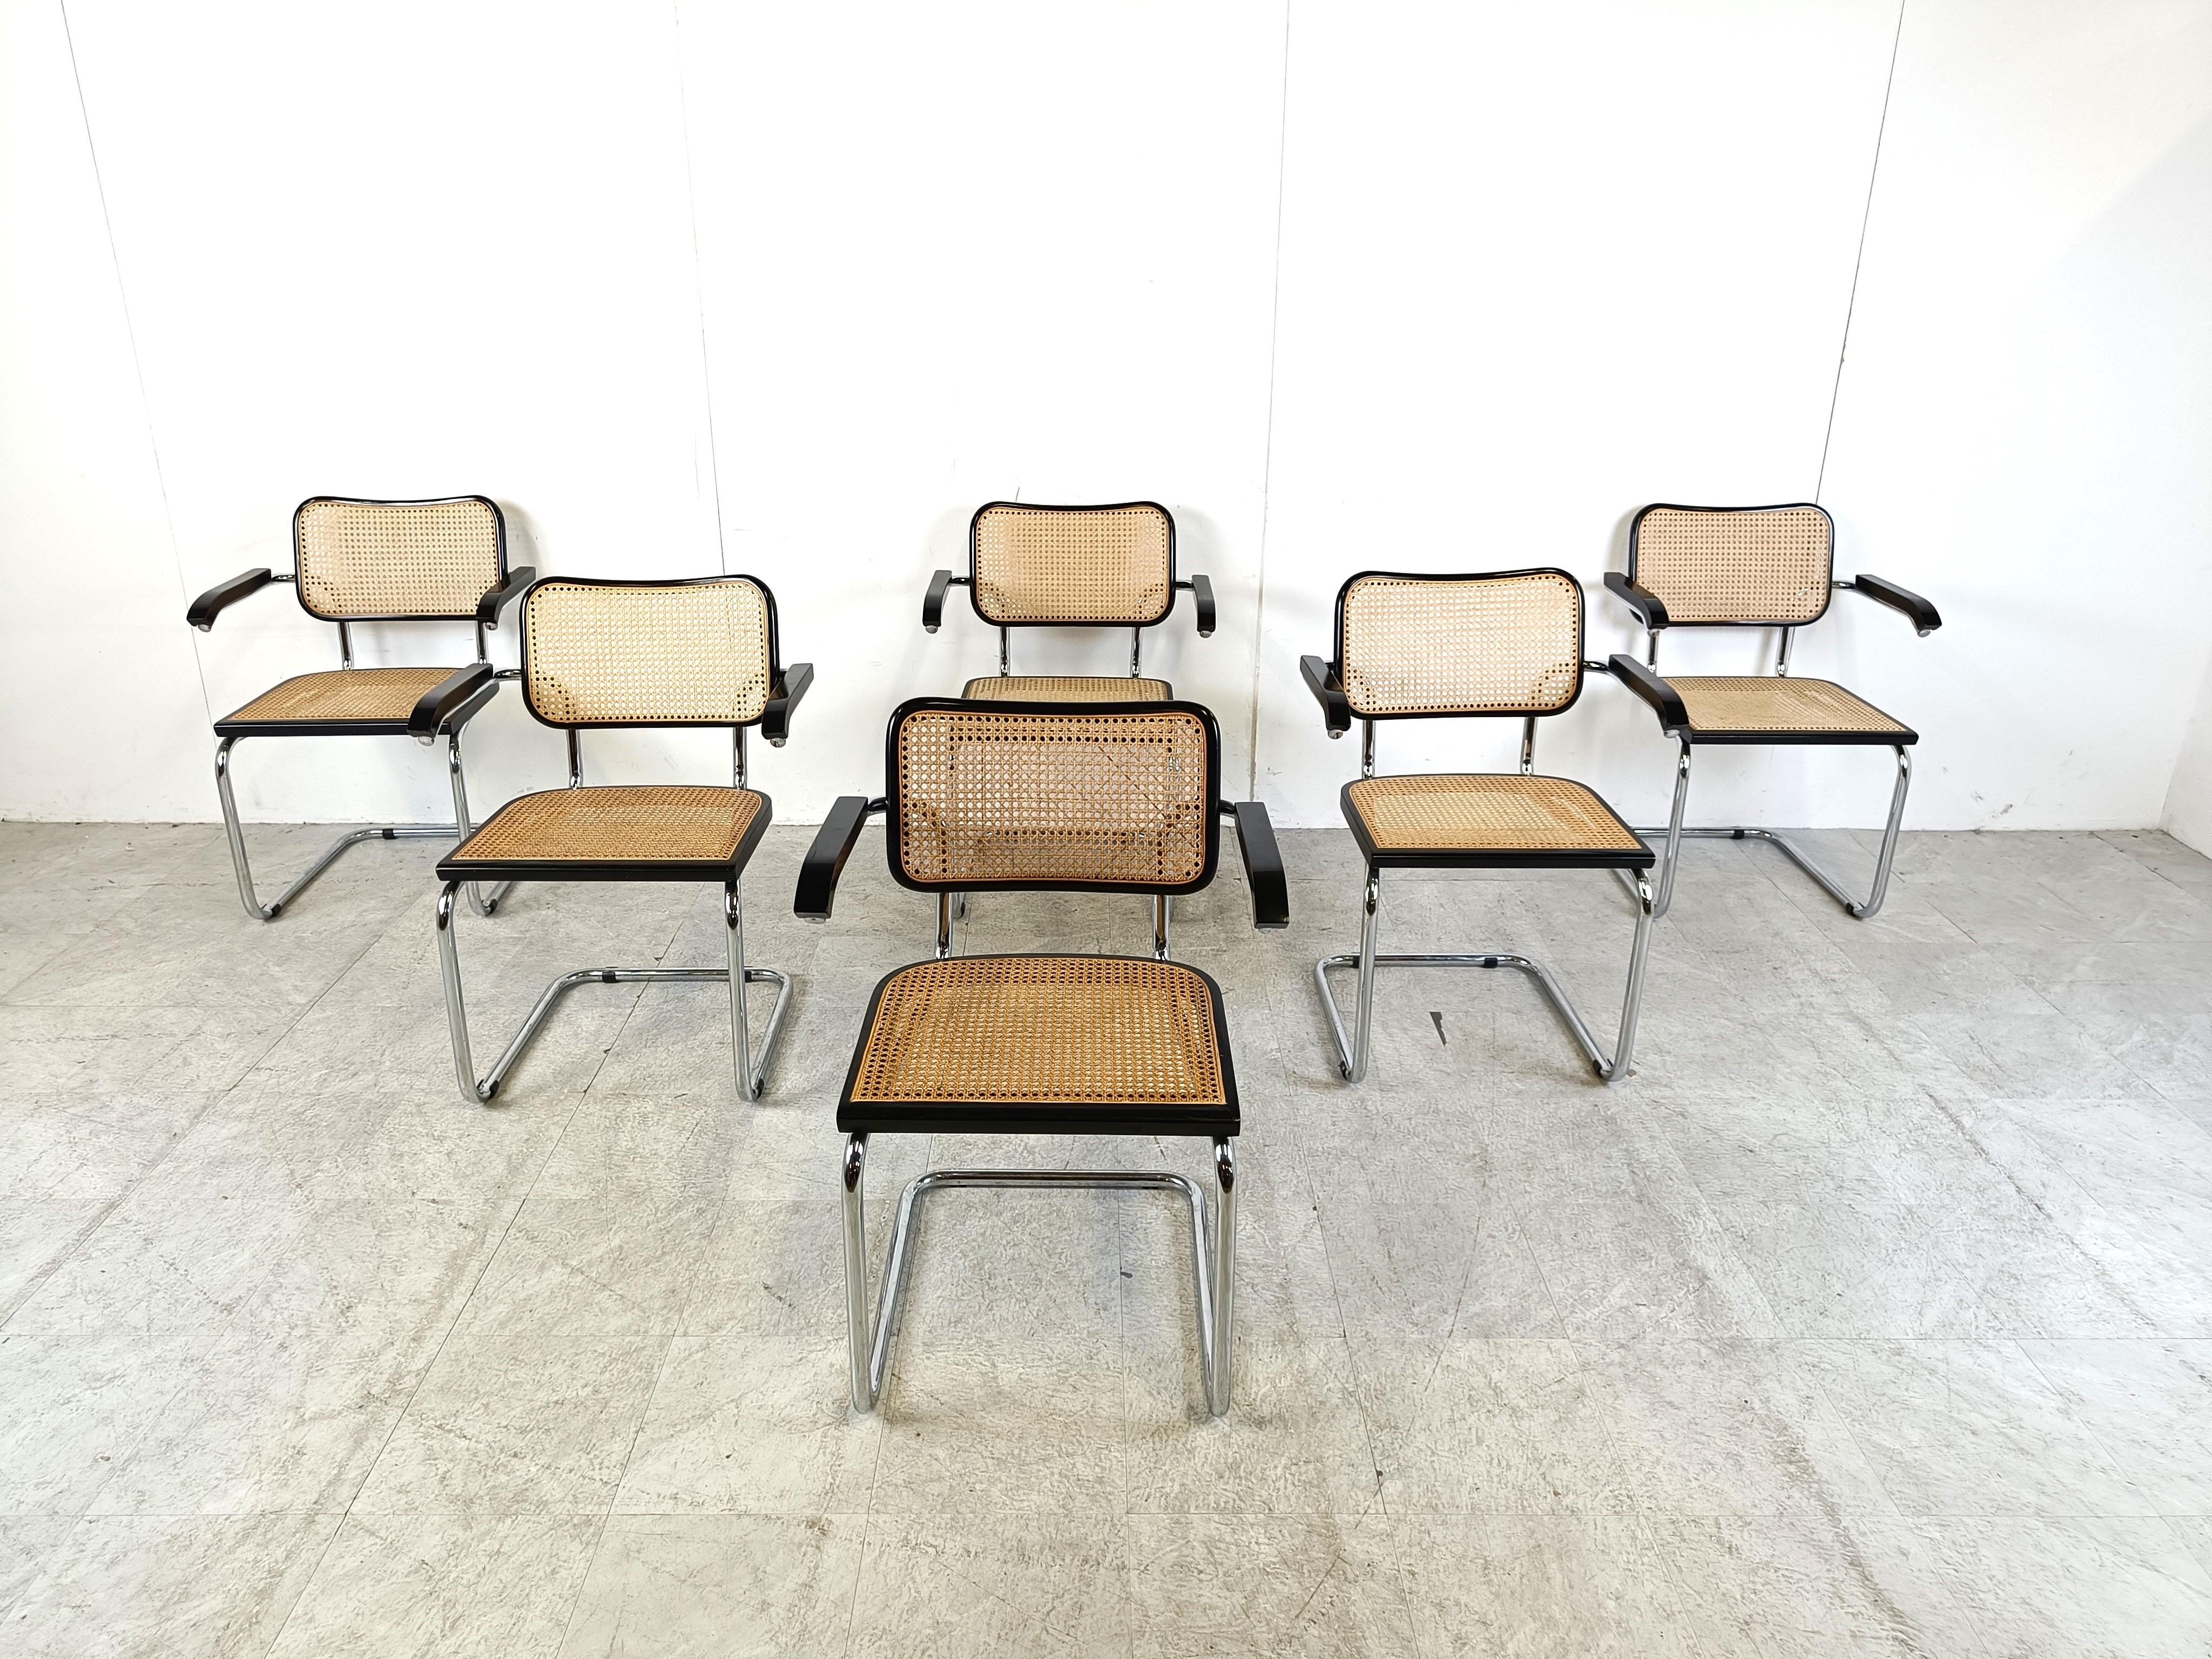 
Beautiful bauhaus style 'cesca' B64 armchairs in the style of Marcel Breuer

Vintage examples in good condition.

1970s - Italy

Timeless cantilever design with black Lacquered wooden and woven rattan seats and backrests and chromed tubular steel